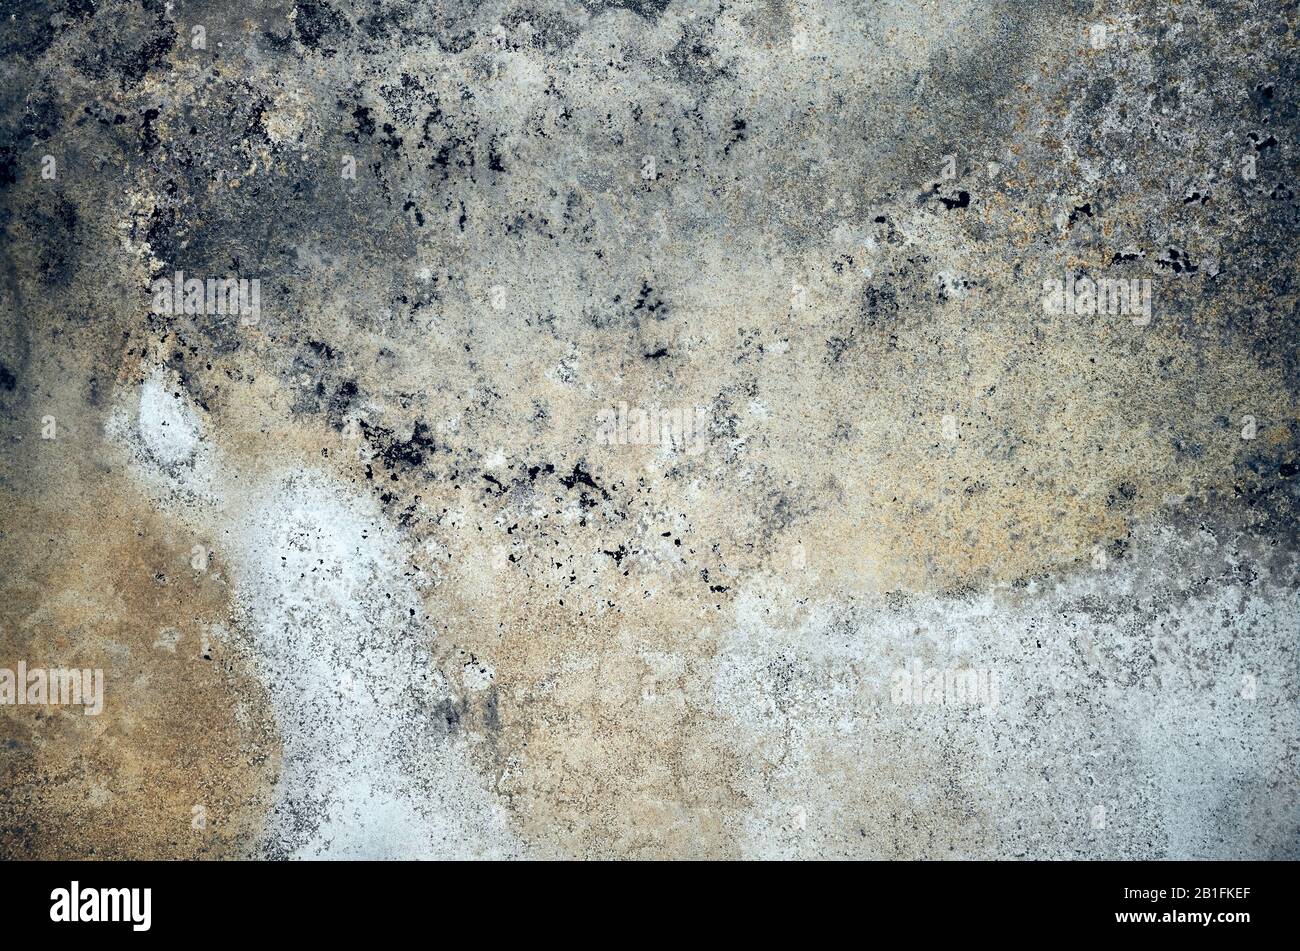 Grunge wall, abstract background or texture. Stock Photo